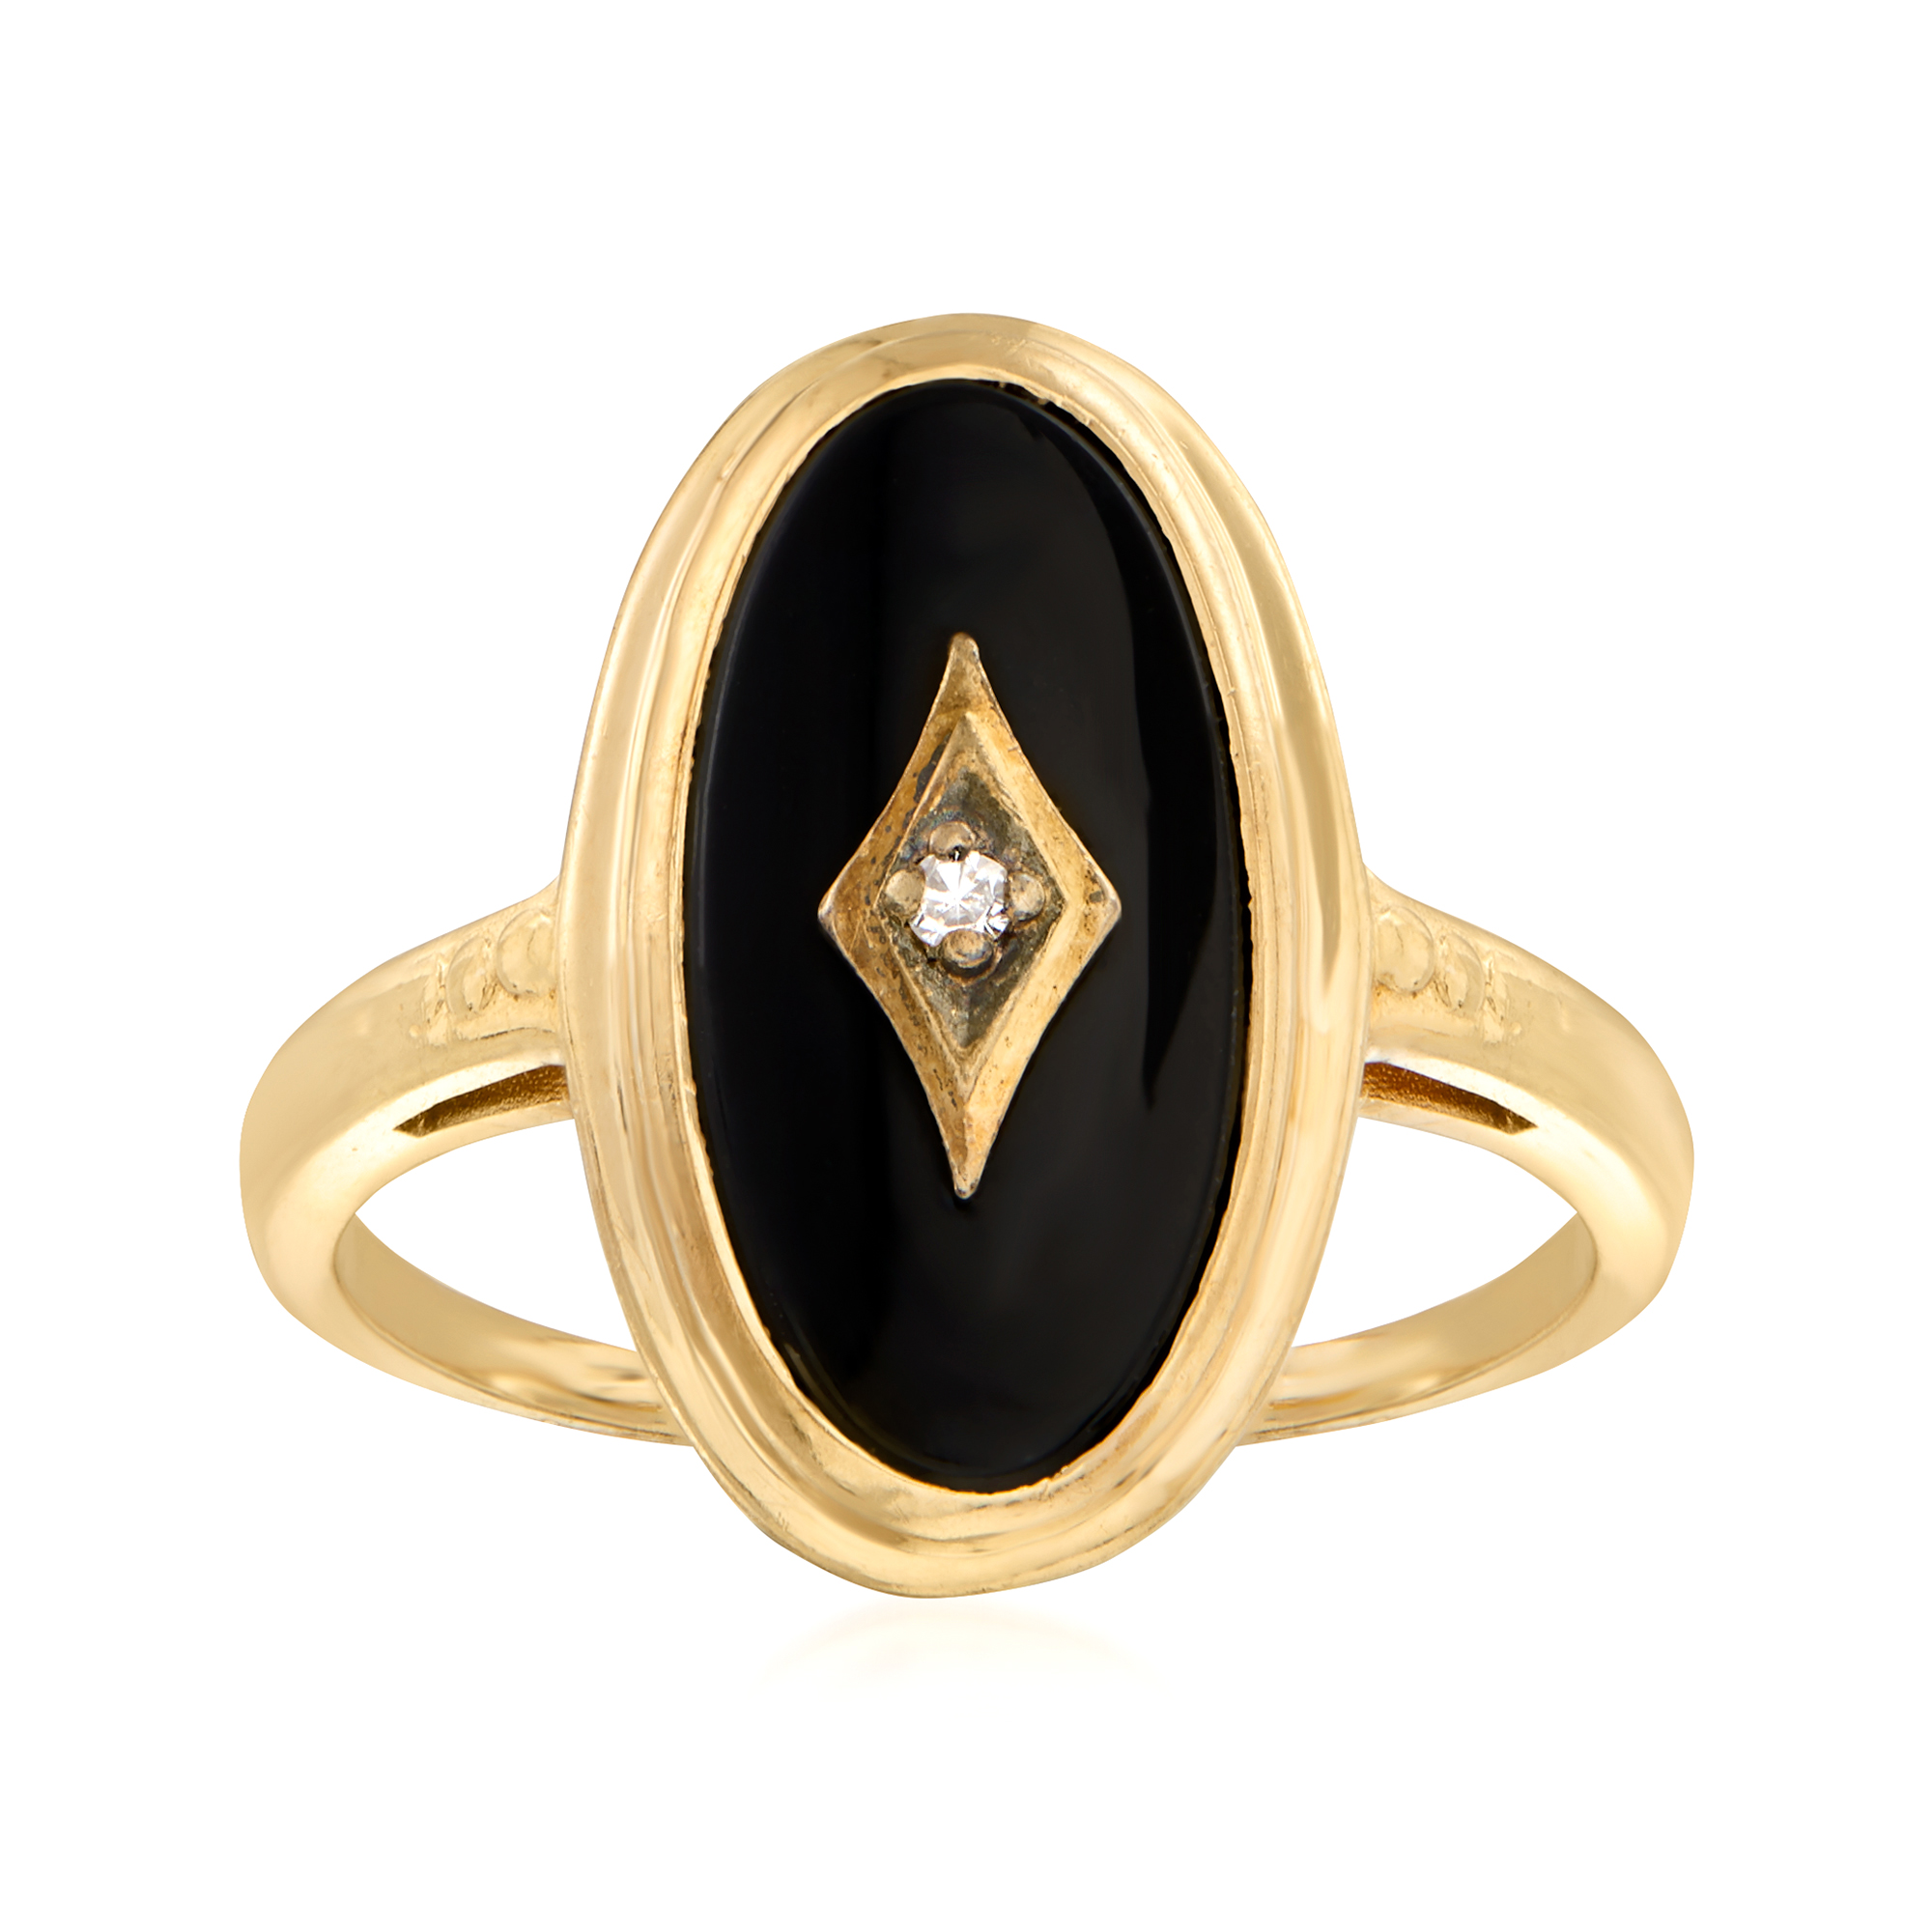 C. 1940 Vintage Black Onyx Ring with Diamond Accents in 14kt Yellow Gold |  Ross-Simons